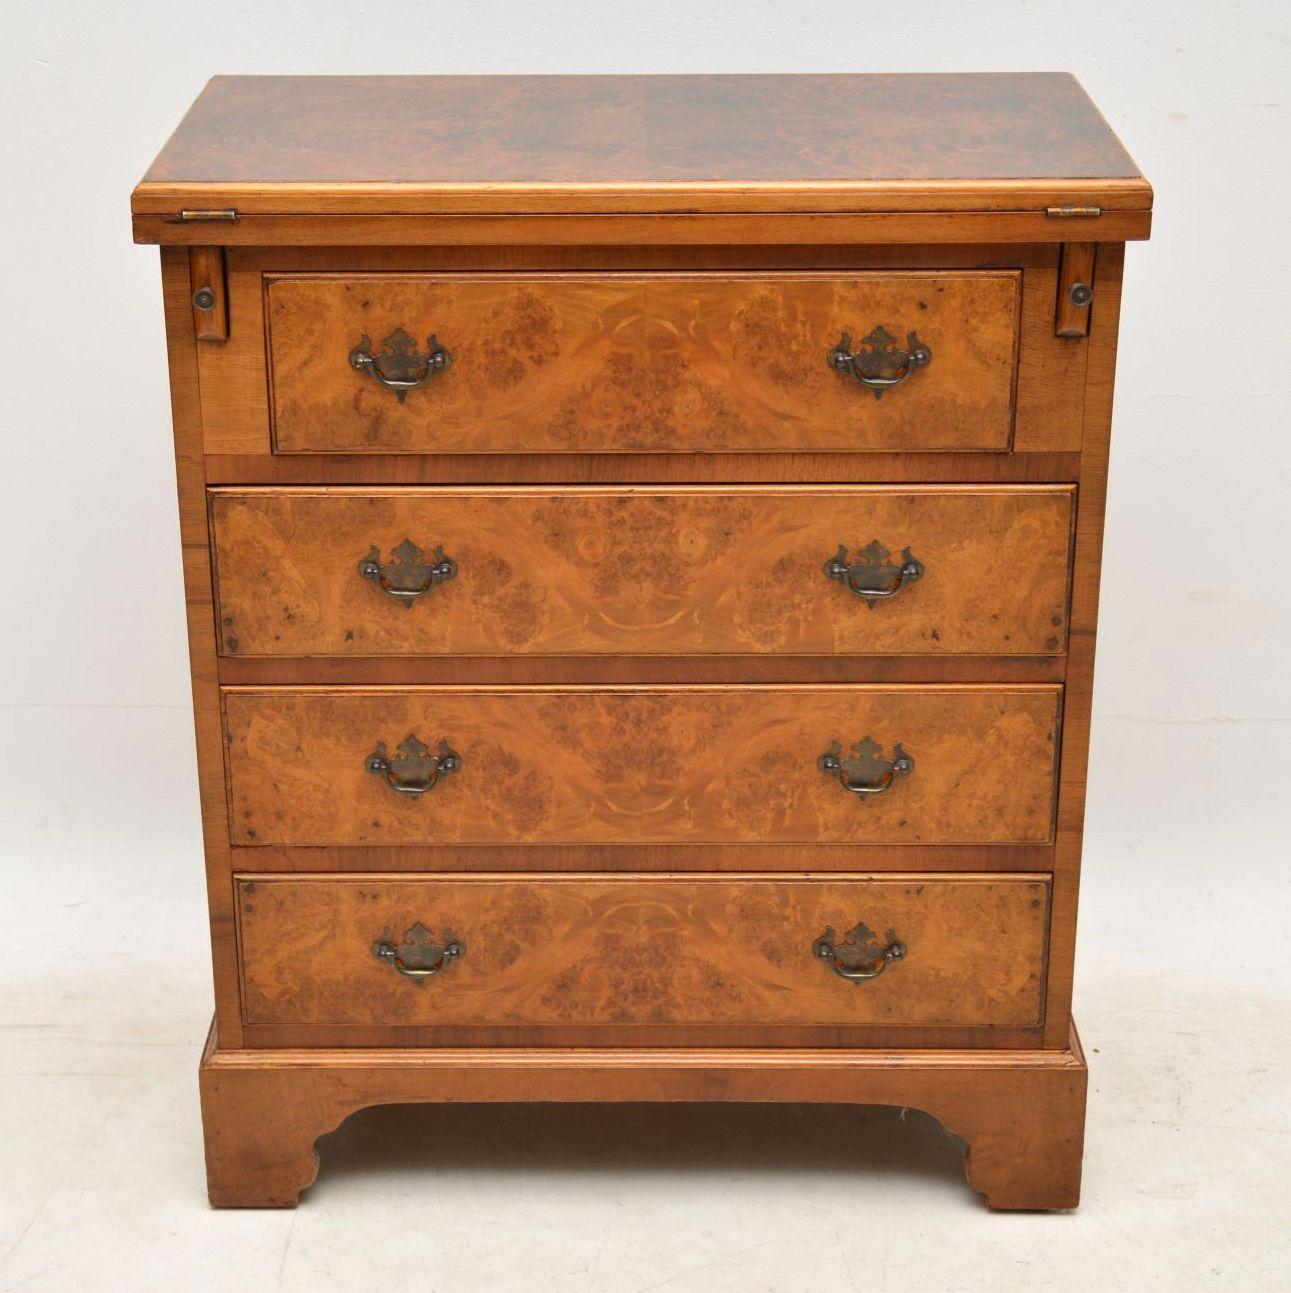 English Antique Burr Walnut Bachelors Chest of Drawers